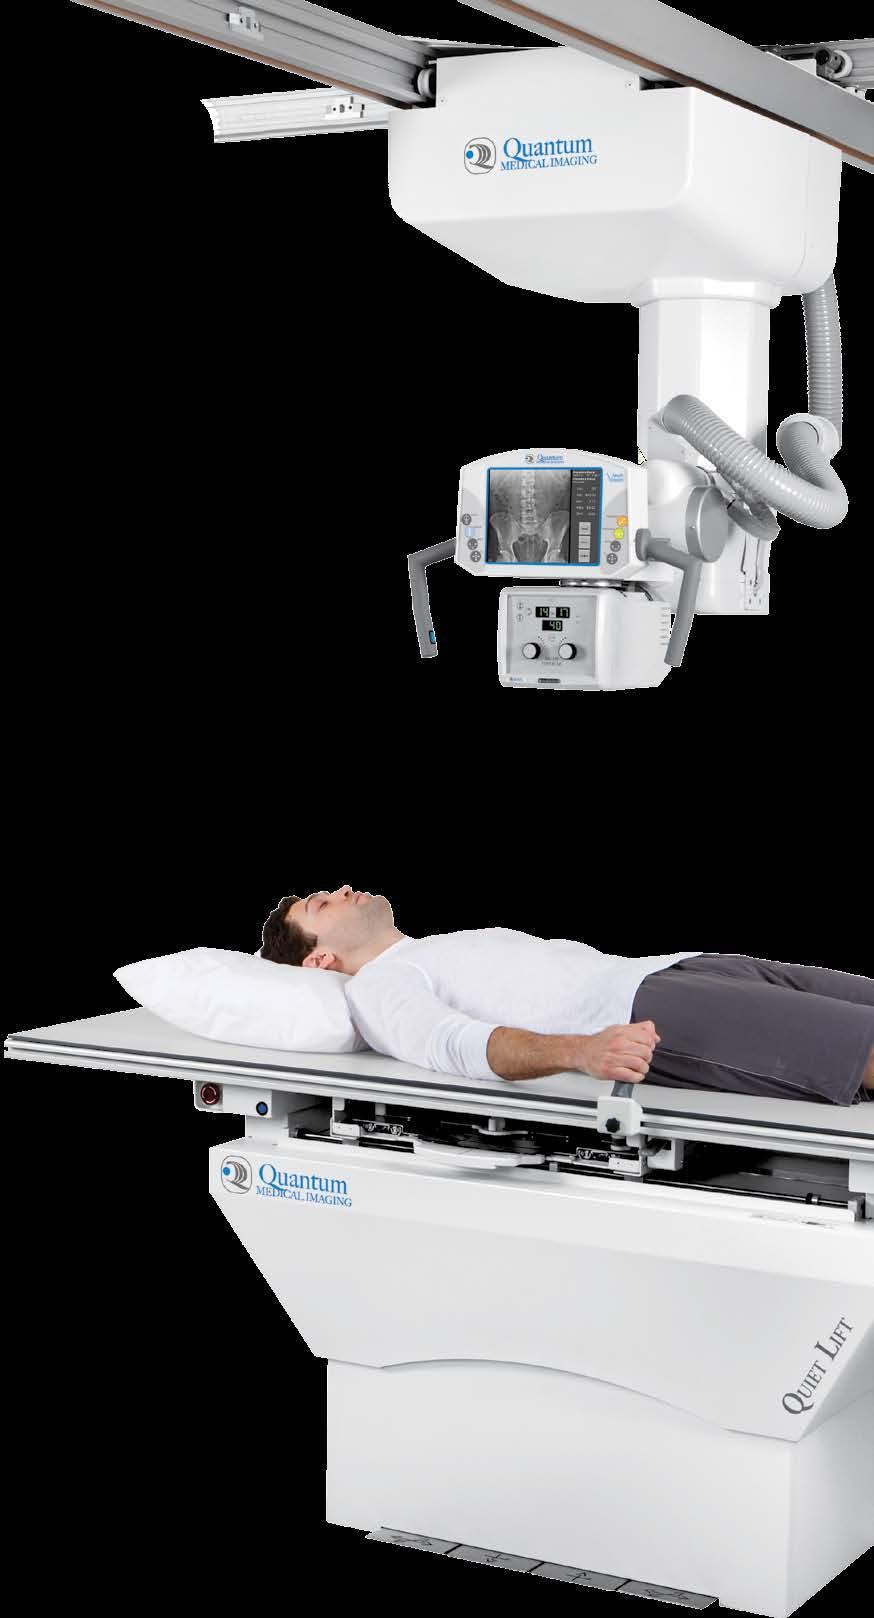 CEILING-MOUNTED SYSTEMS The Quantum Q-Rad-DIGITAL Ceiling System enhances your DR workflow and ability to position patients.